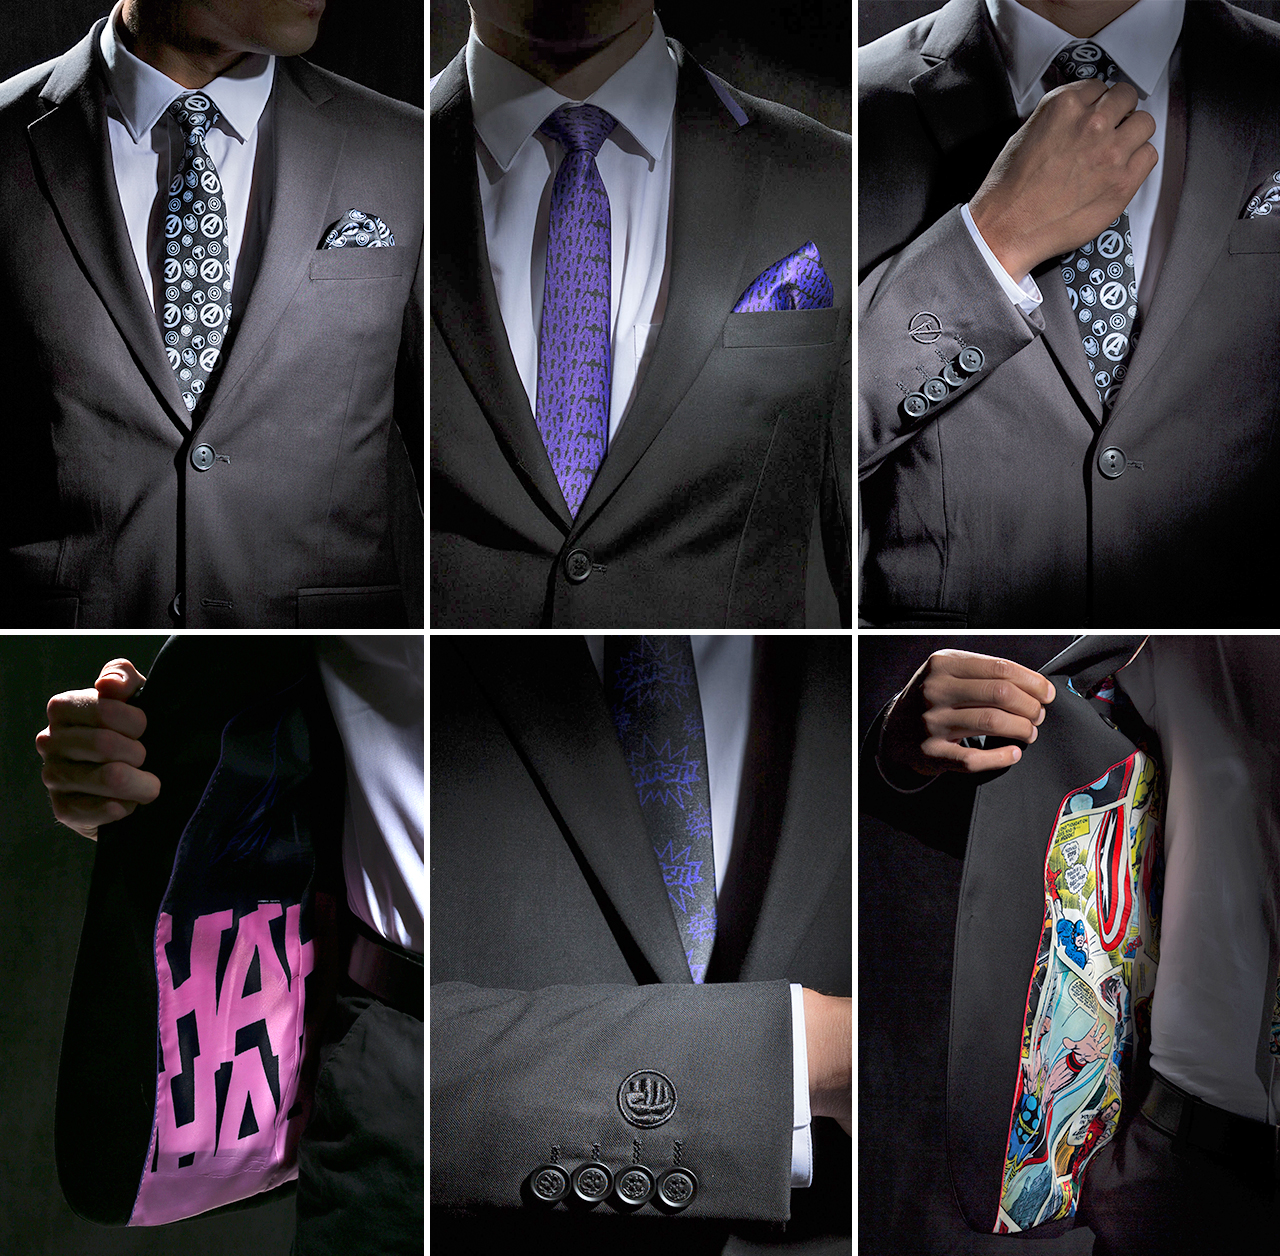 Look As Stylish As Tony Stark In These New Marvel- And DC-Themed Business Suits